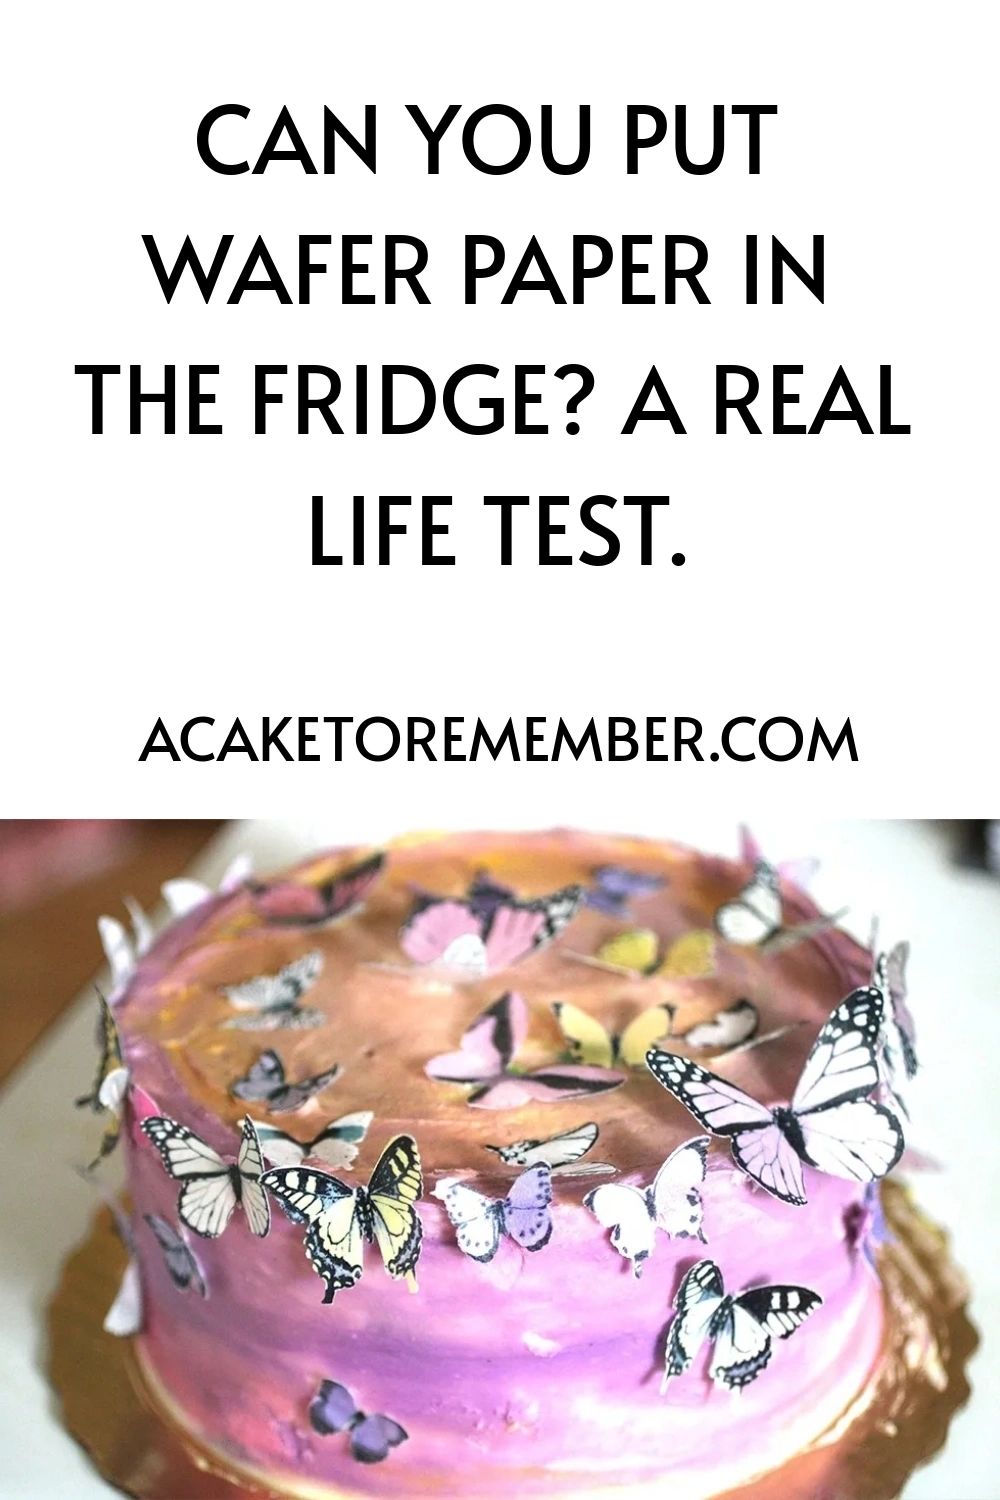 50 Edible Wafer Papers for Cakes and Cookies